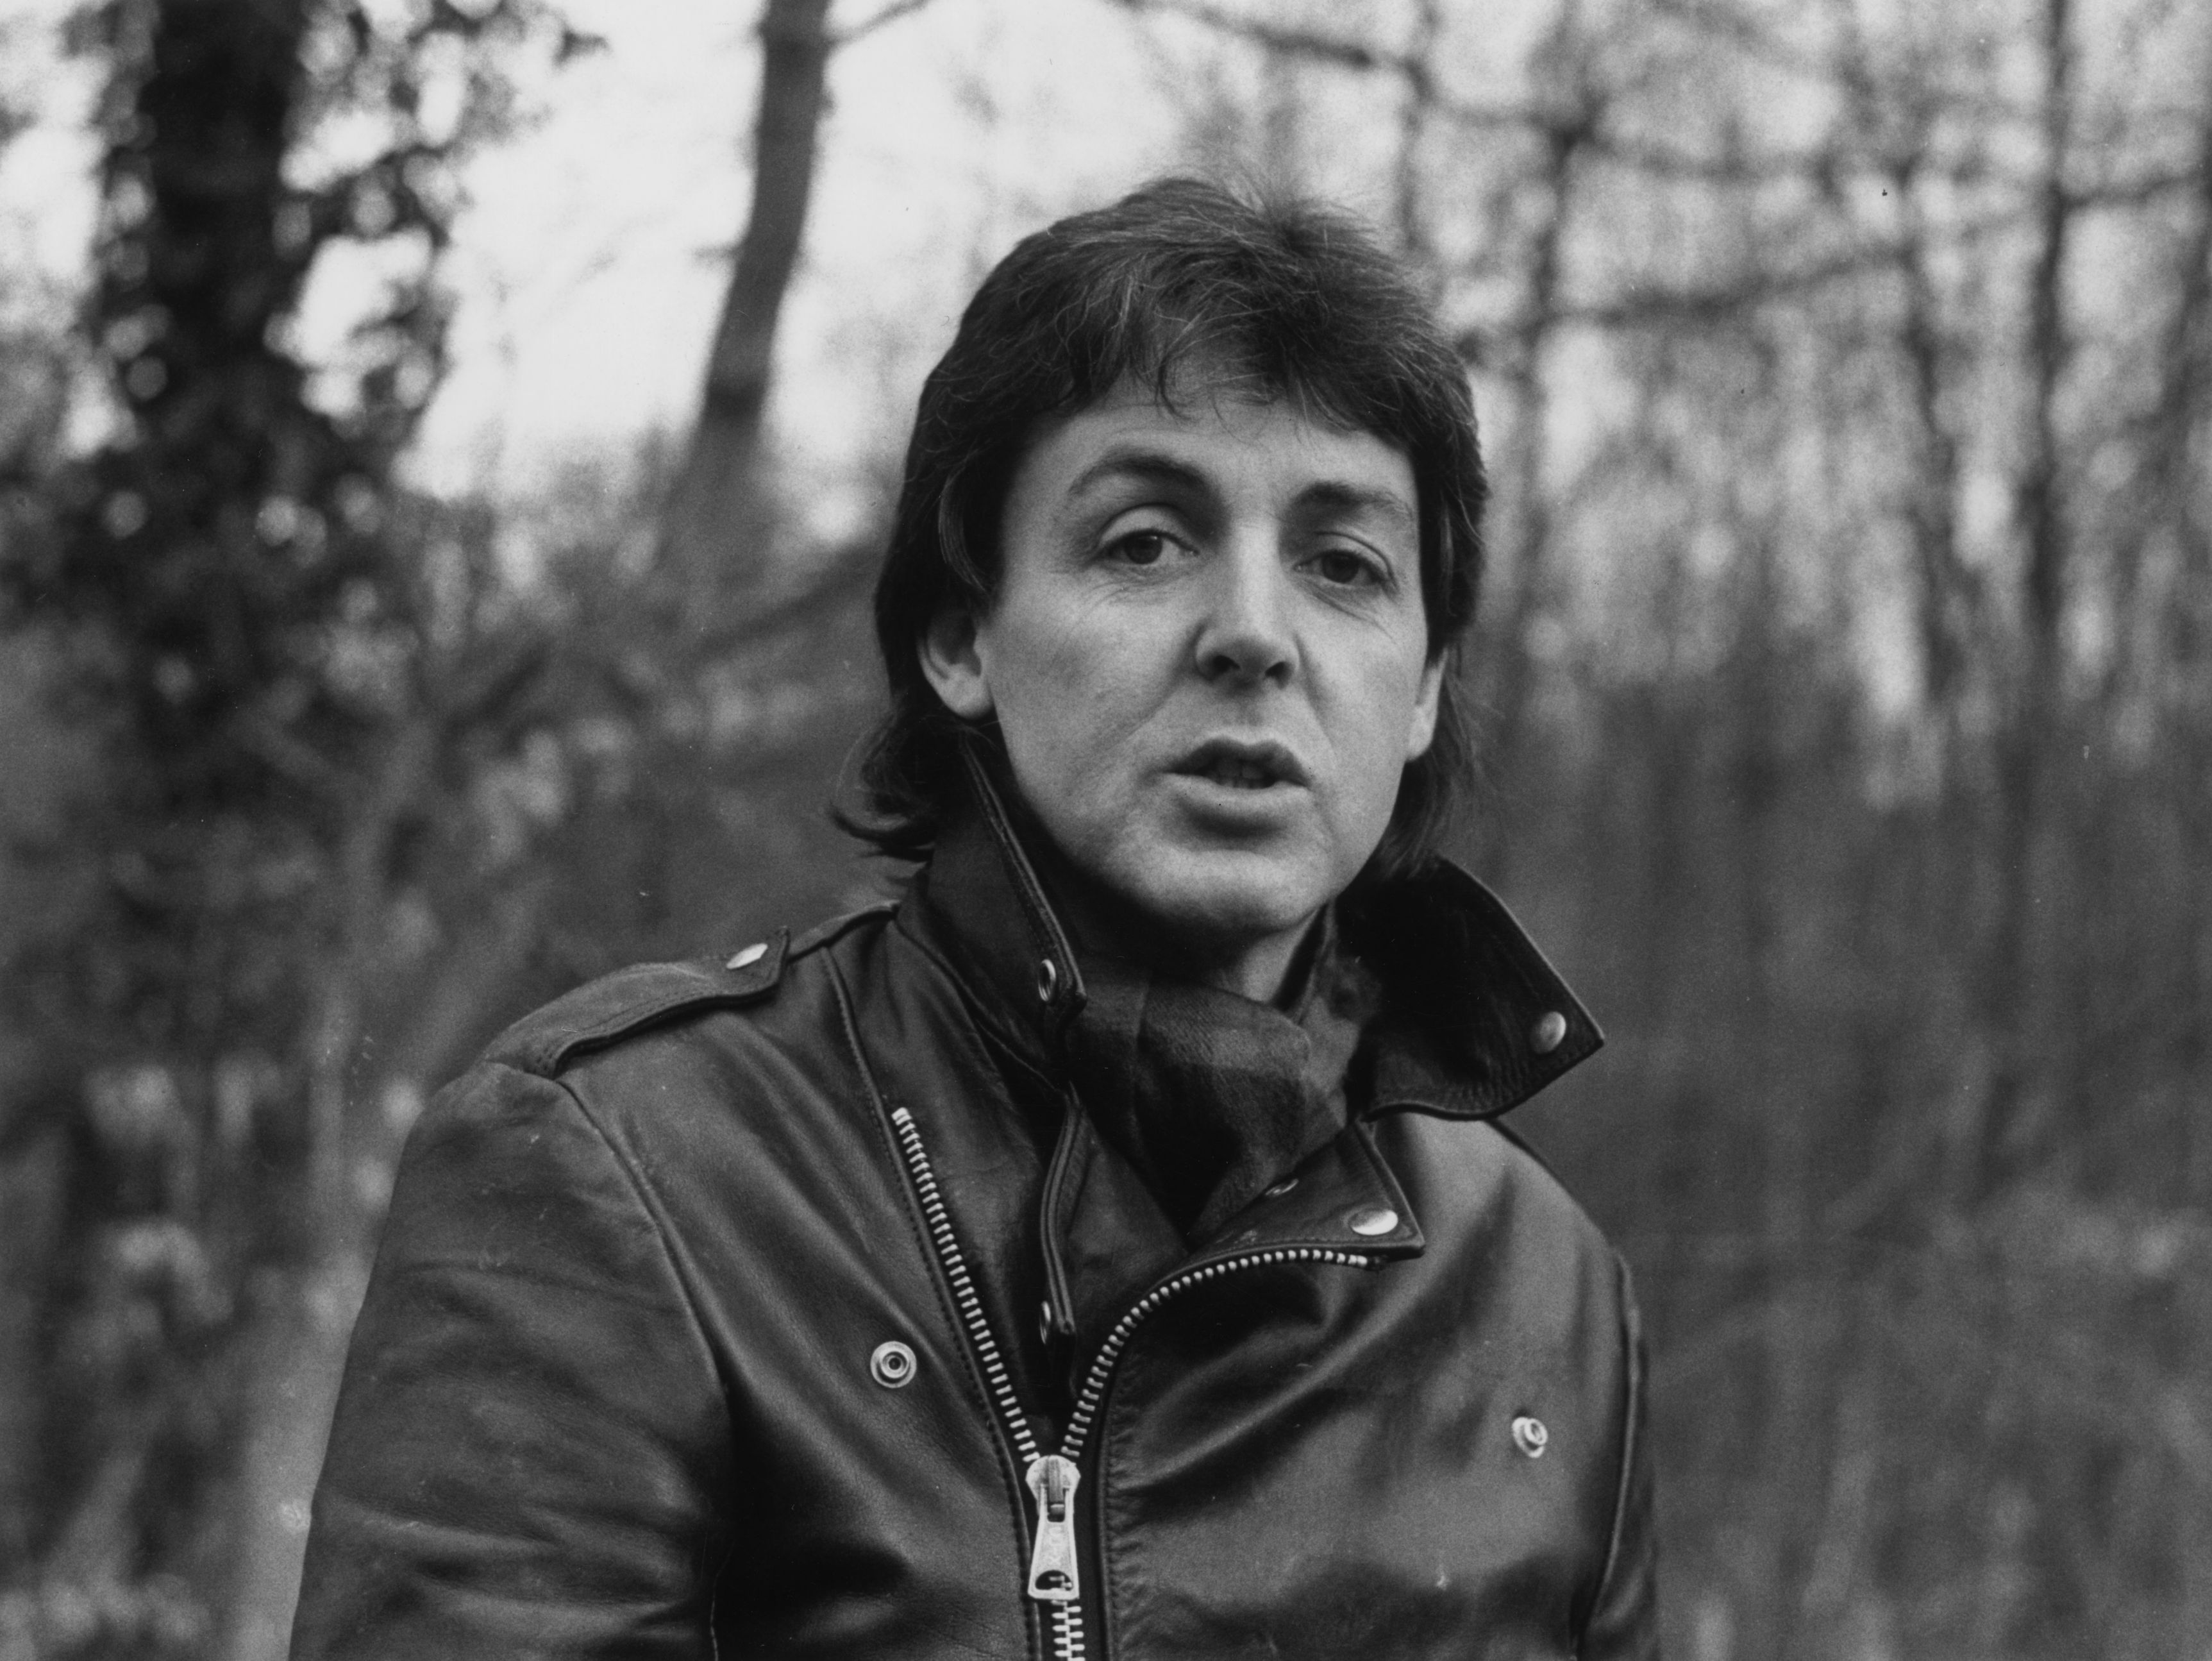 Paul McCartney during his 1980 visit on his farm near Sussex. | Photo: Getty Images